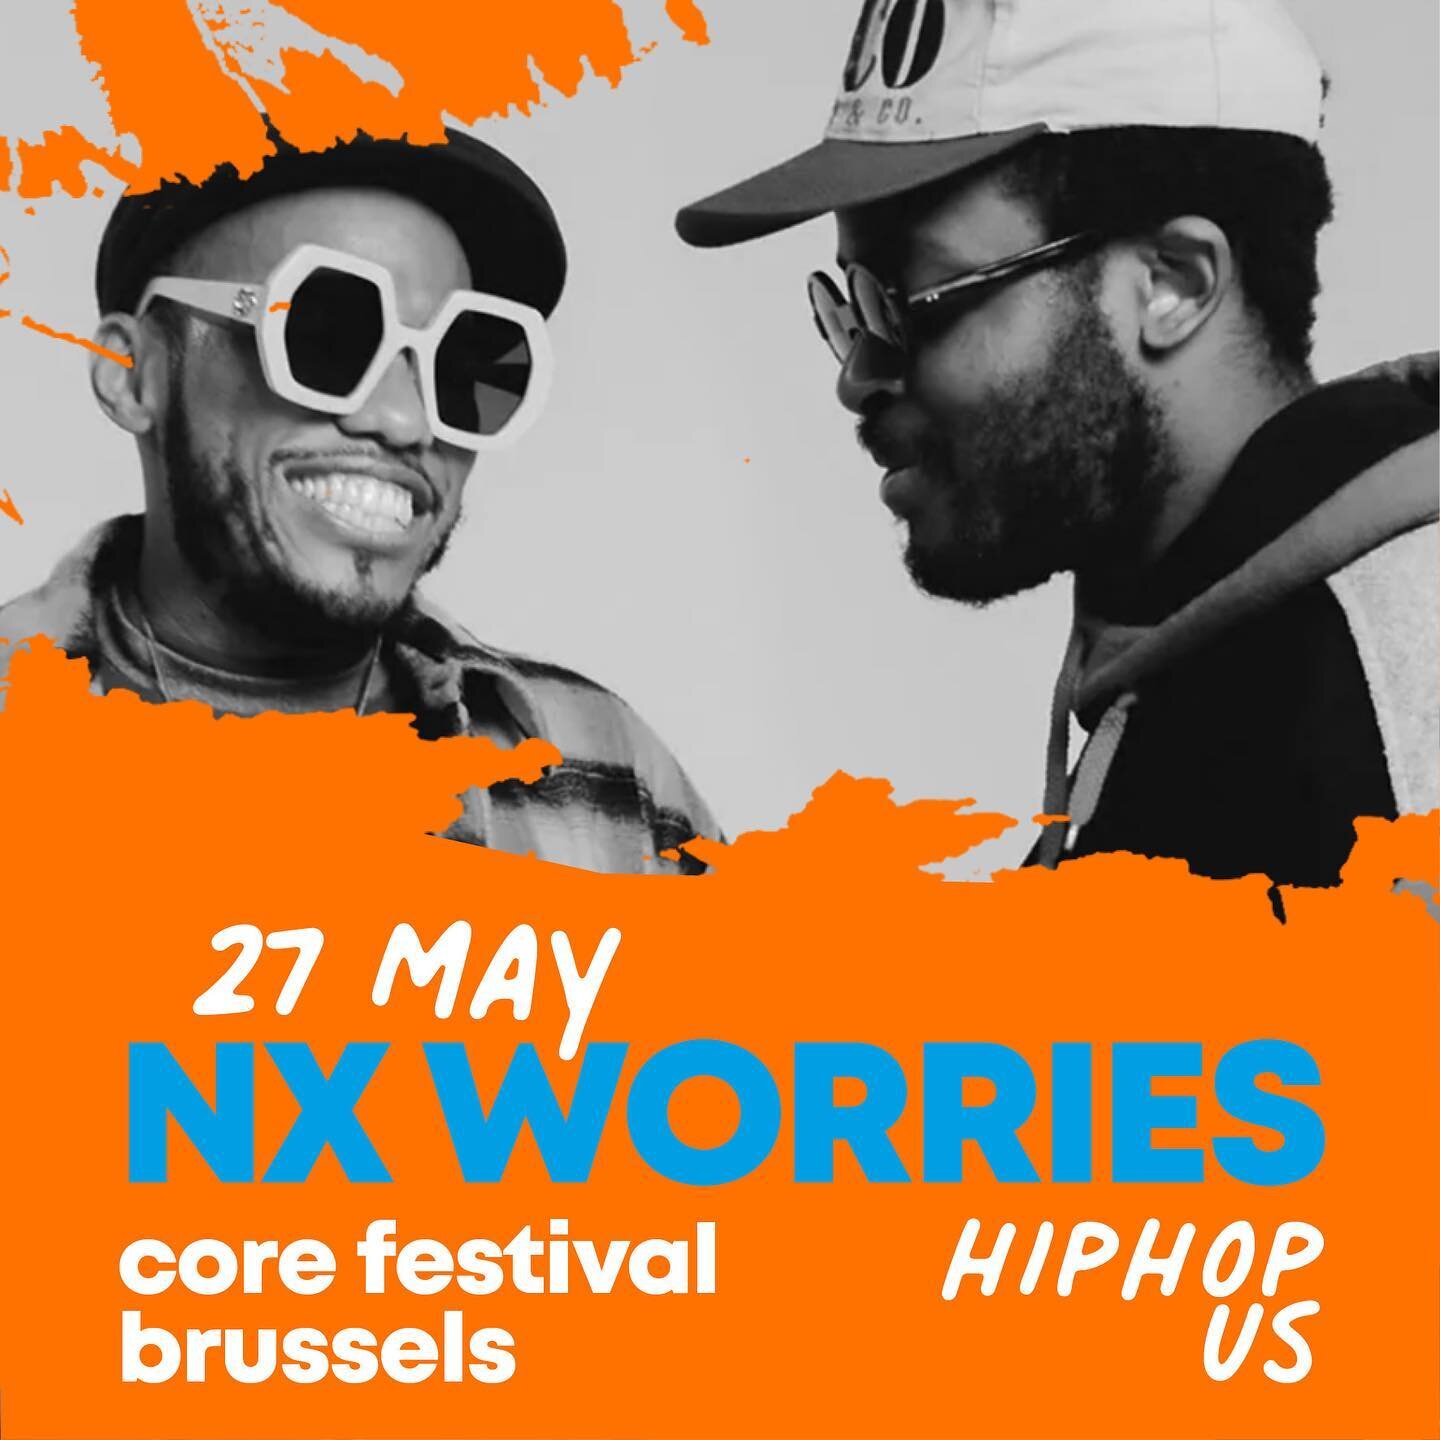 27 MAY

NX WORRIES

CORE FESTIVAL
BRUSSELS

HIPHOP US